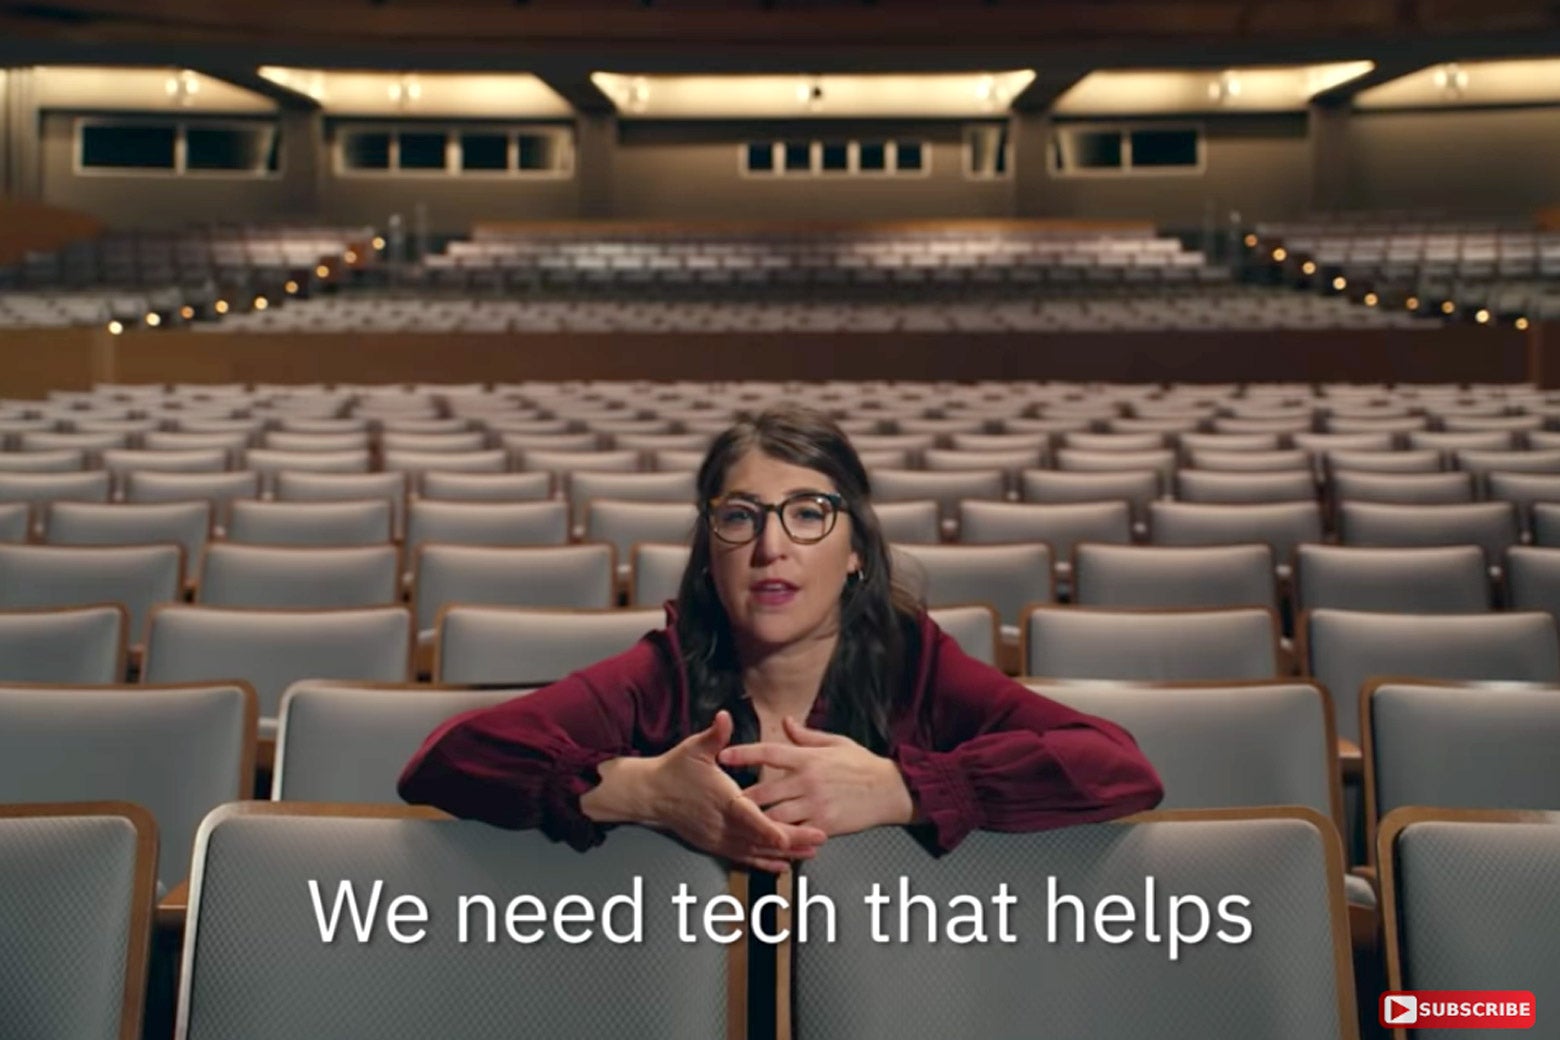 Mayim Bialik in the ad, saying, "We need tech that helps."